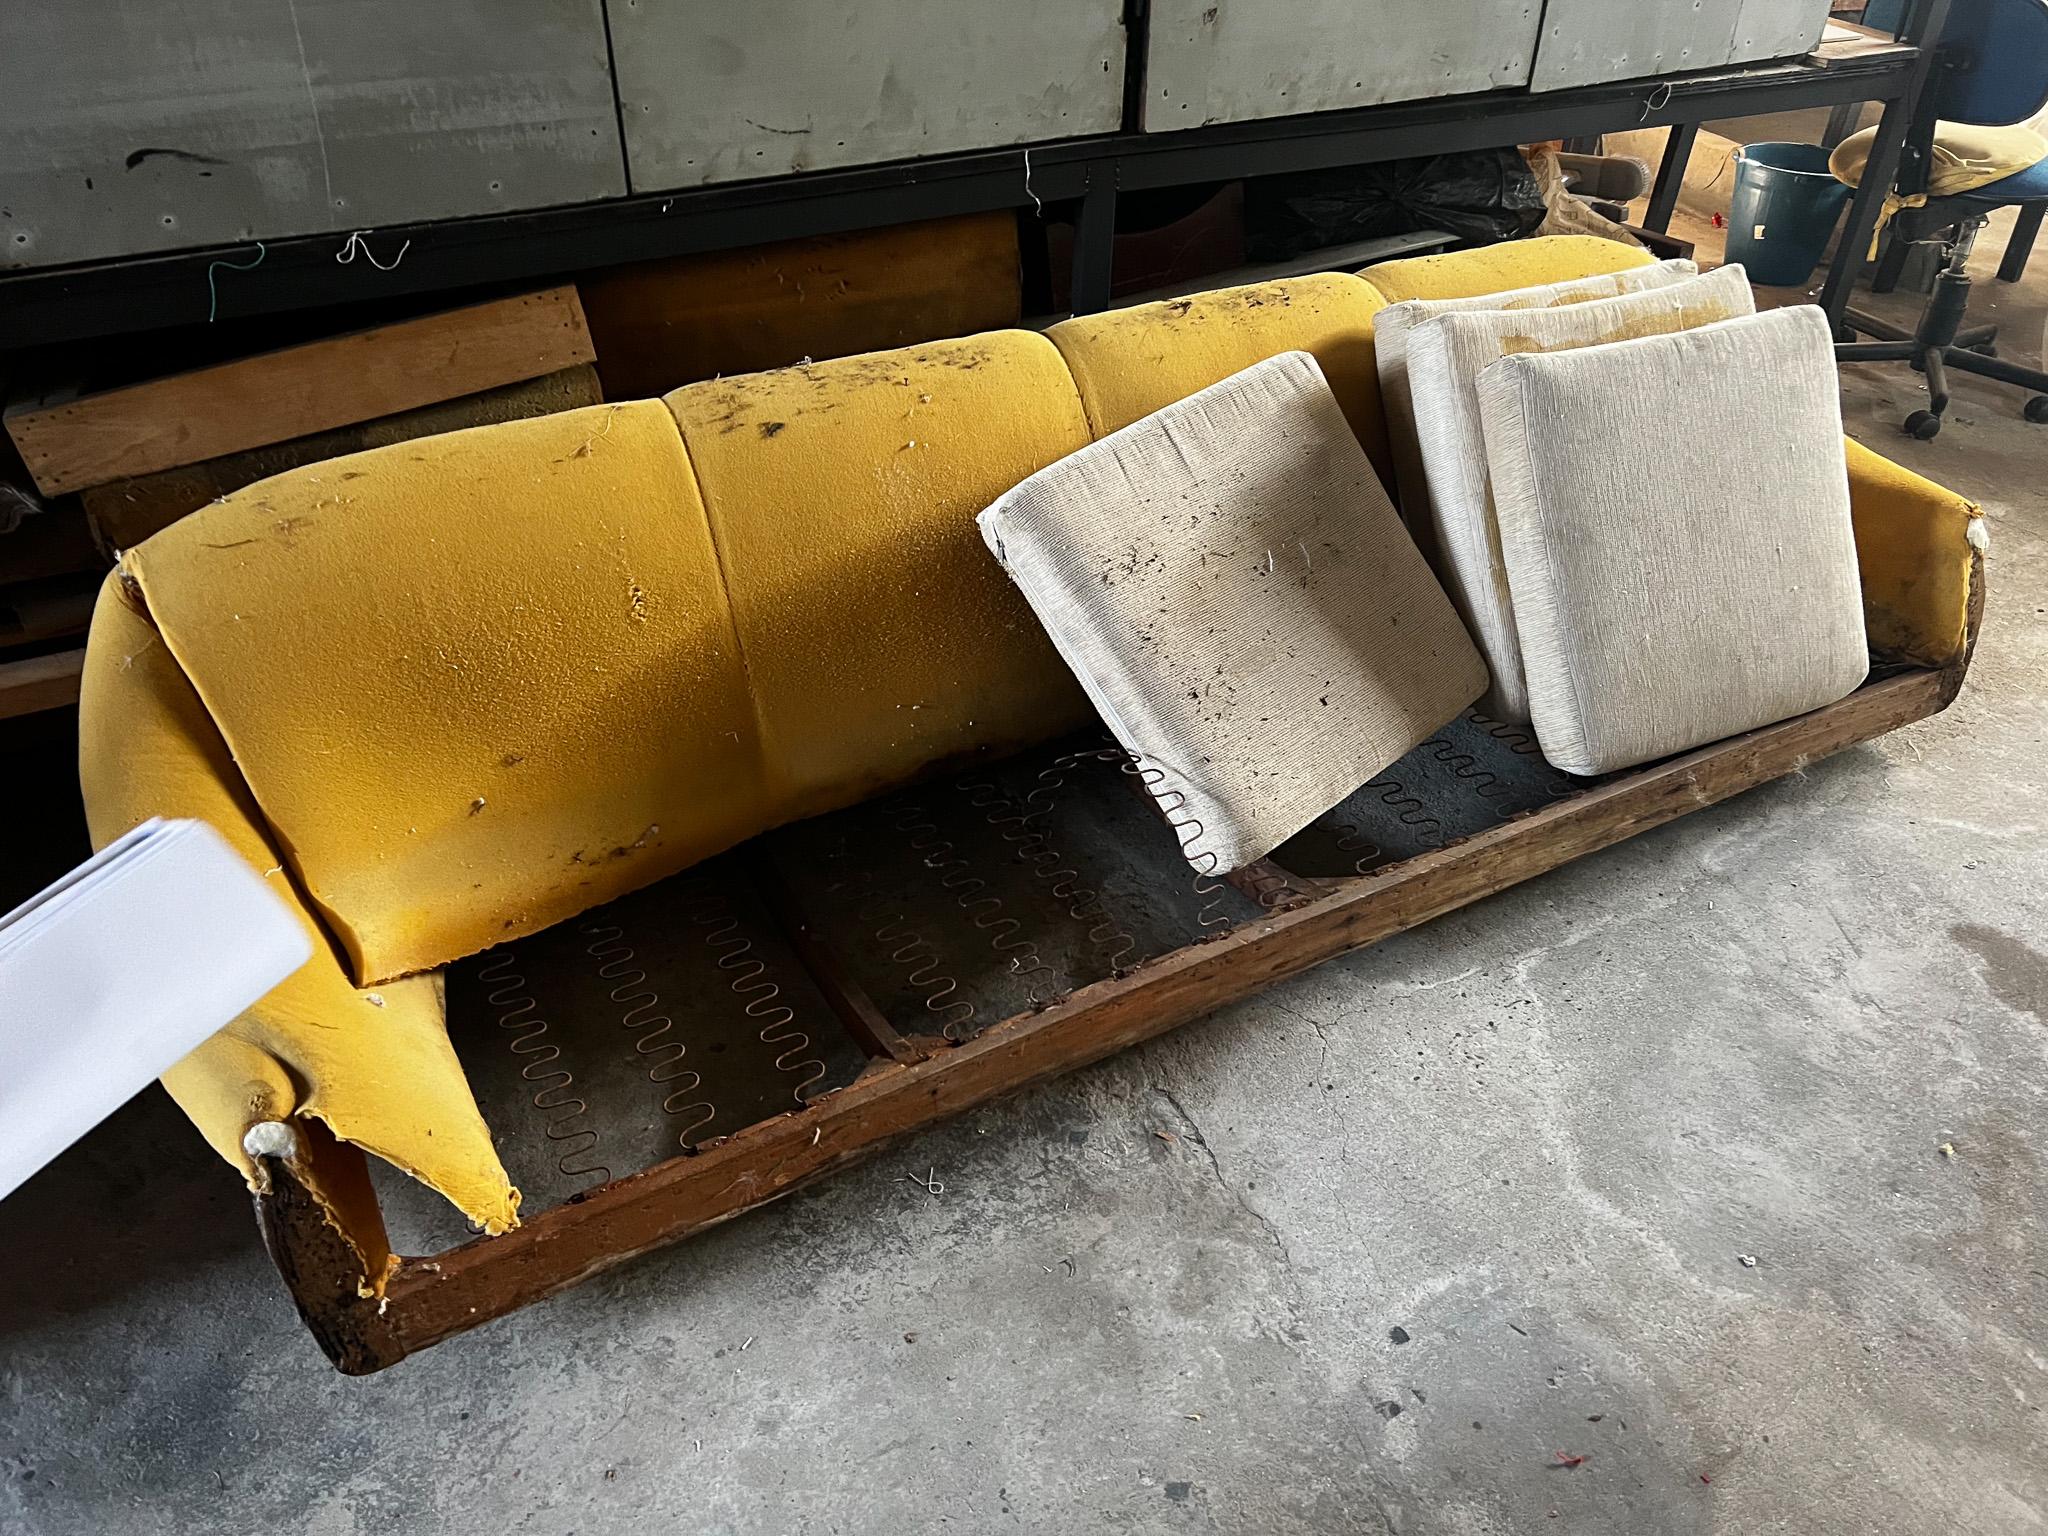 Brazilian Modern Sofa in Hardwood, Grey Leather & White Fabric by Cimo, 1960s For Sale 5